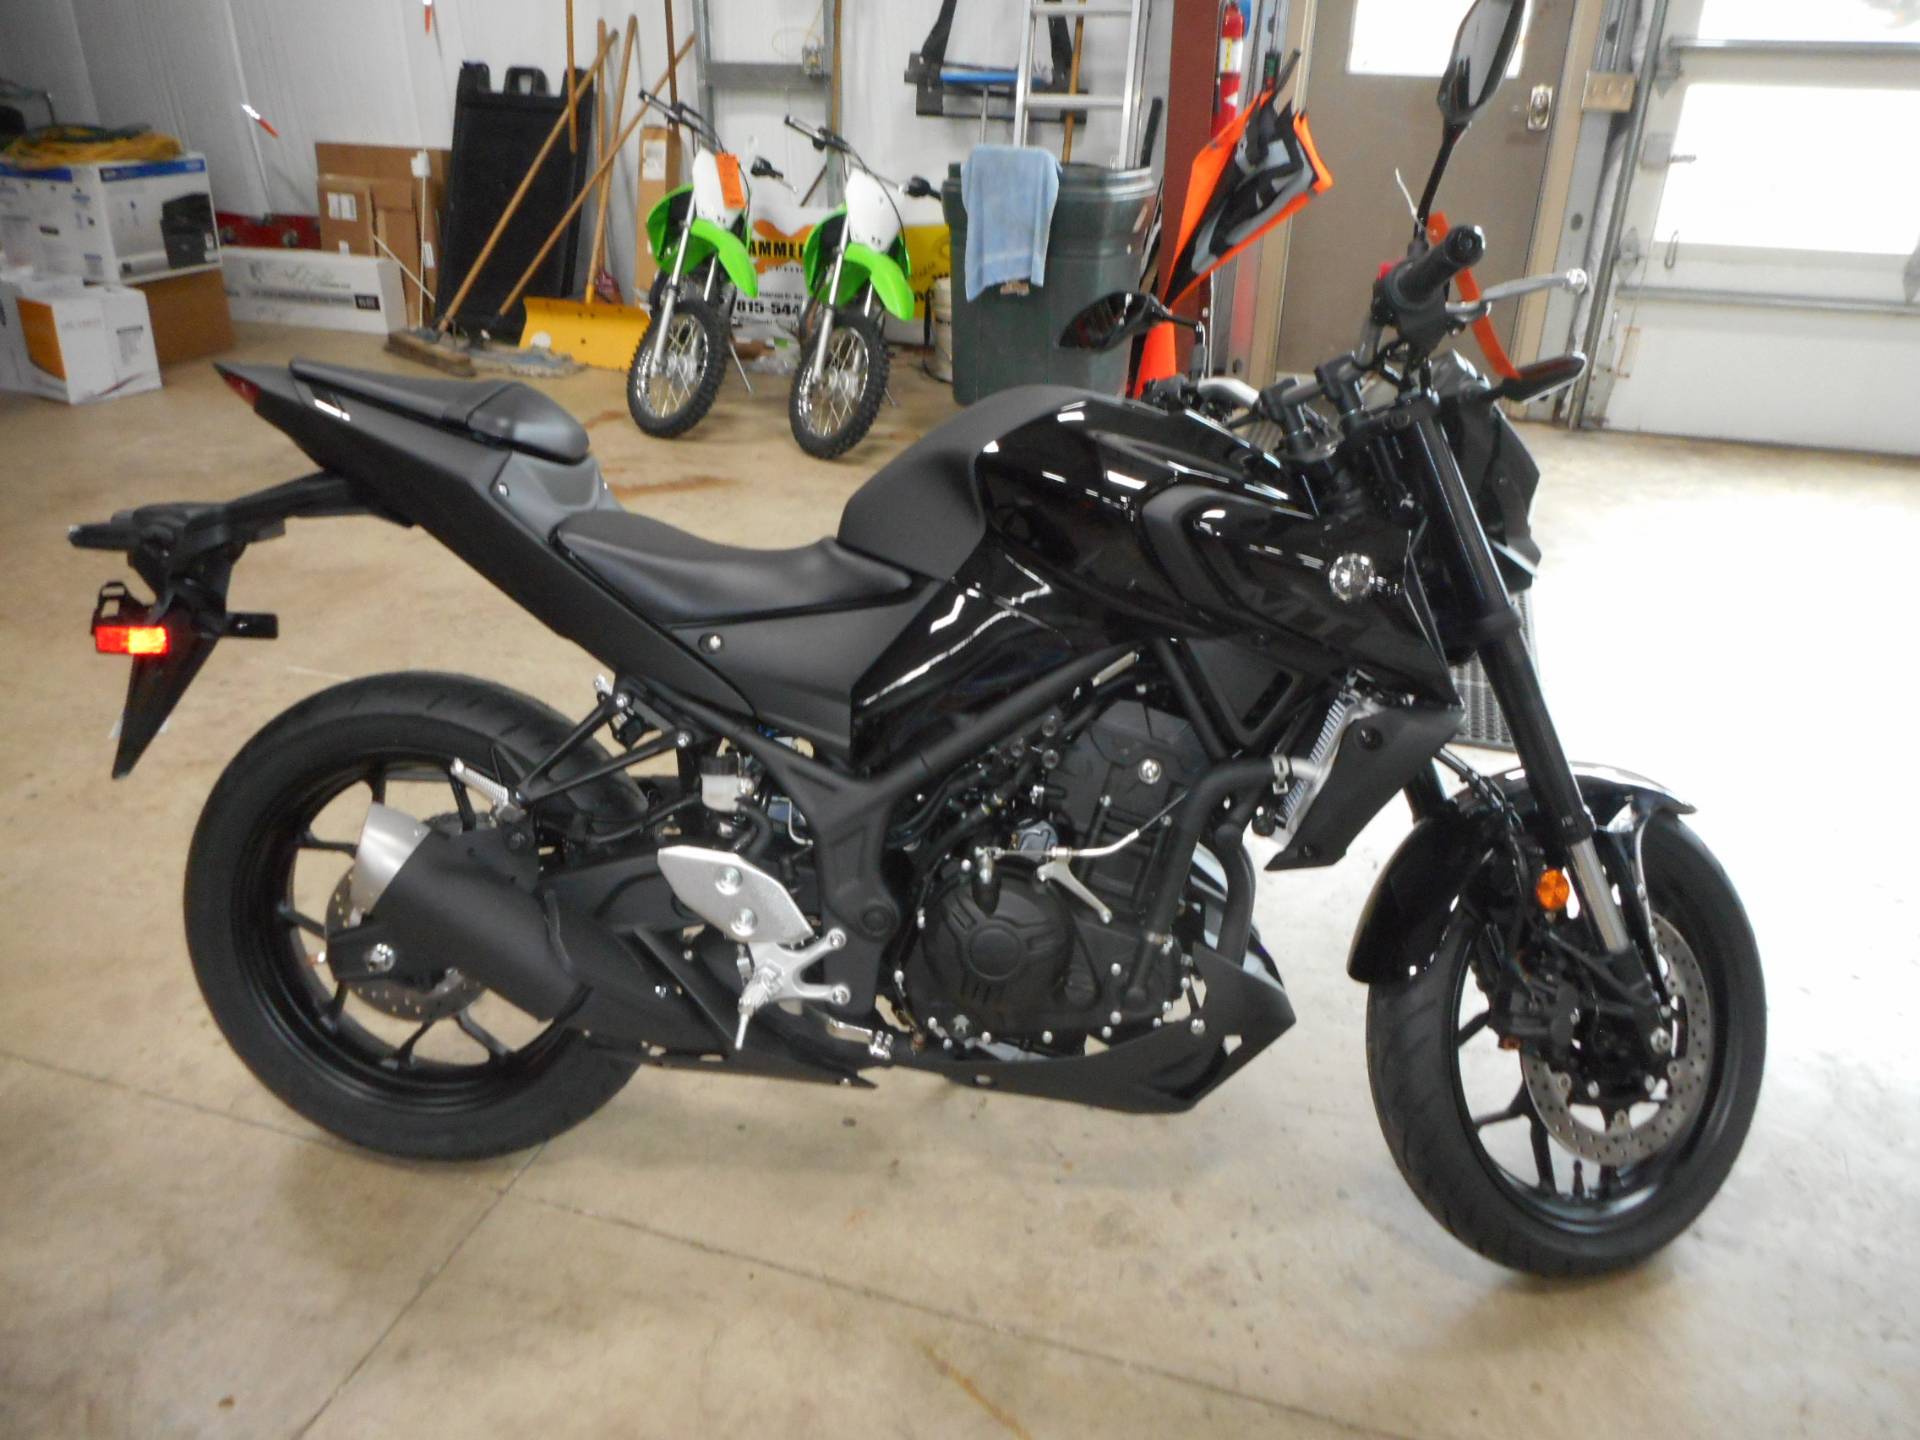 New 2020 Yamaha Mt 03 Motorcycles In Belvidere Il